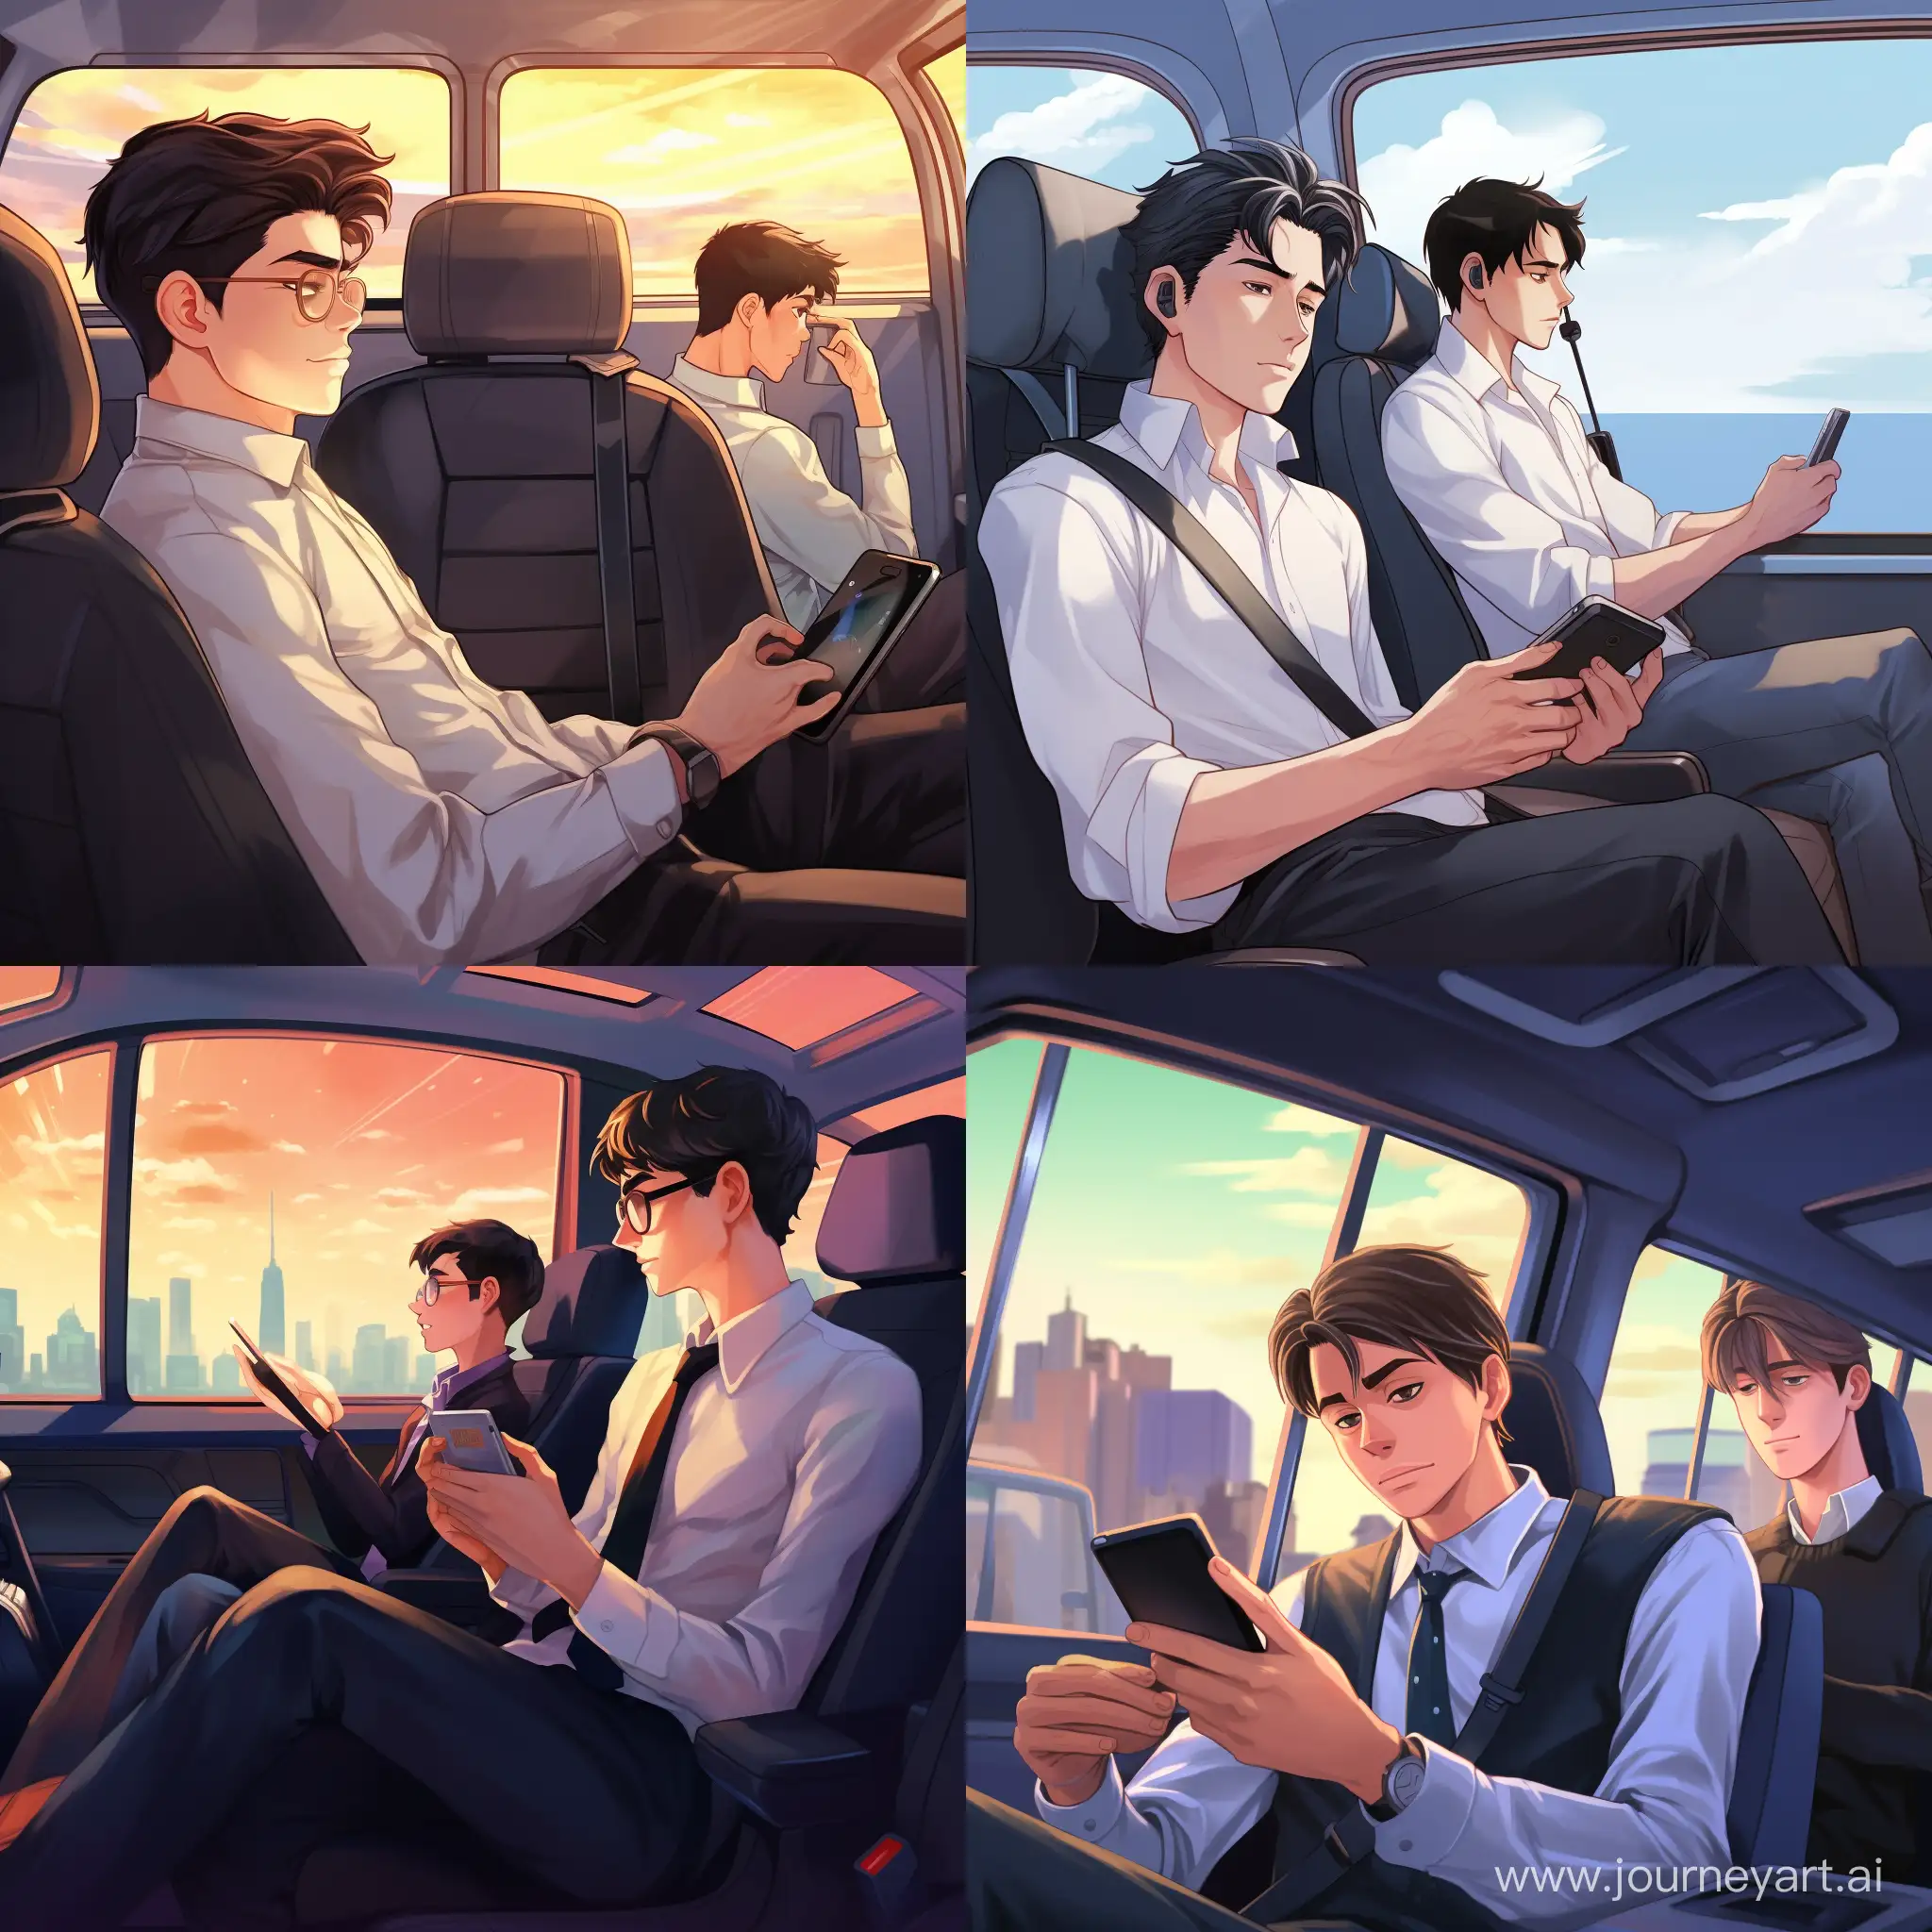 View from the rear right seat of the entire interior of a left-hand drive business class car, a guy driver is sitting behind the wheel, one boring guy passenger is sitting in the back left seat, holding a phone in one hand, anime style